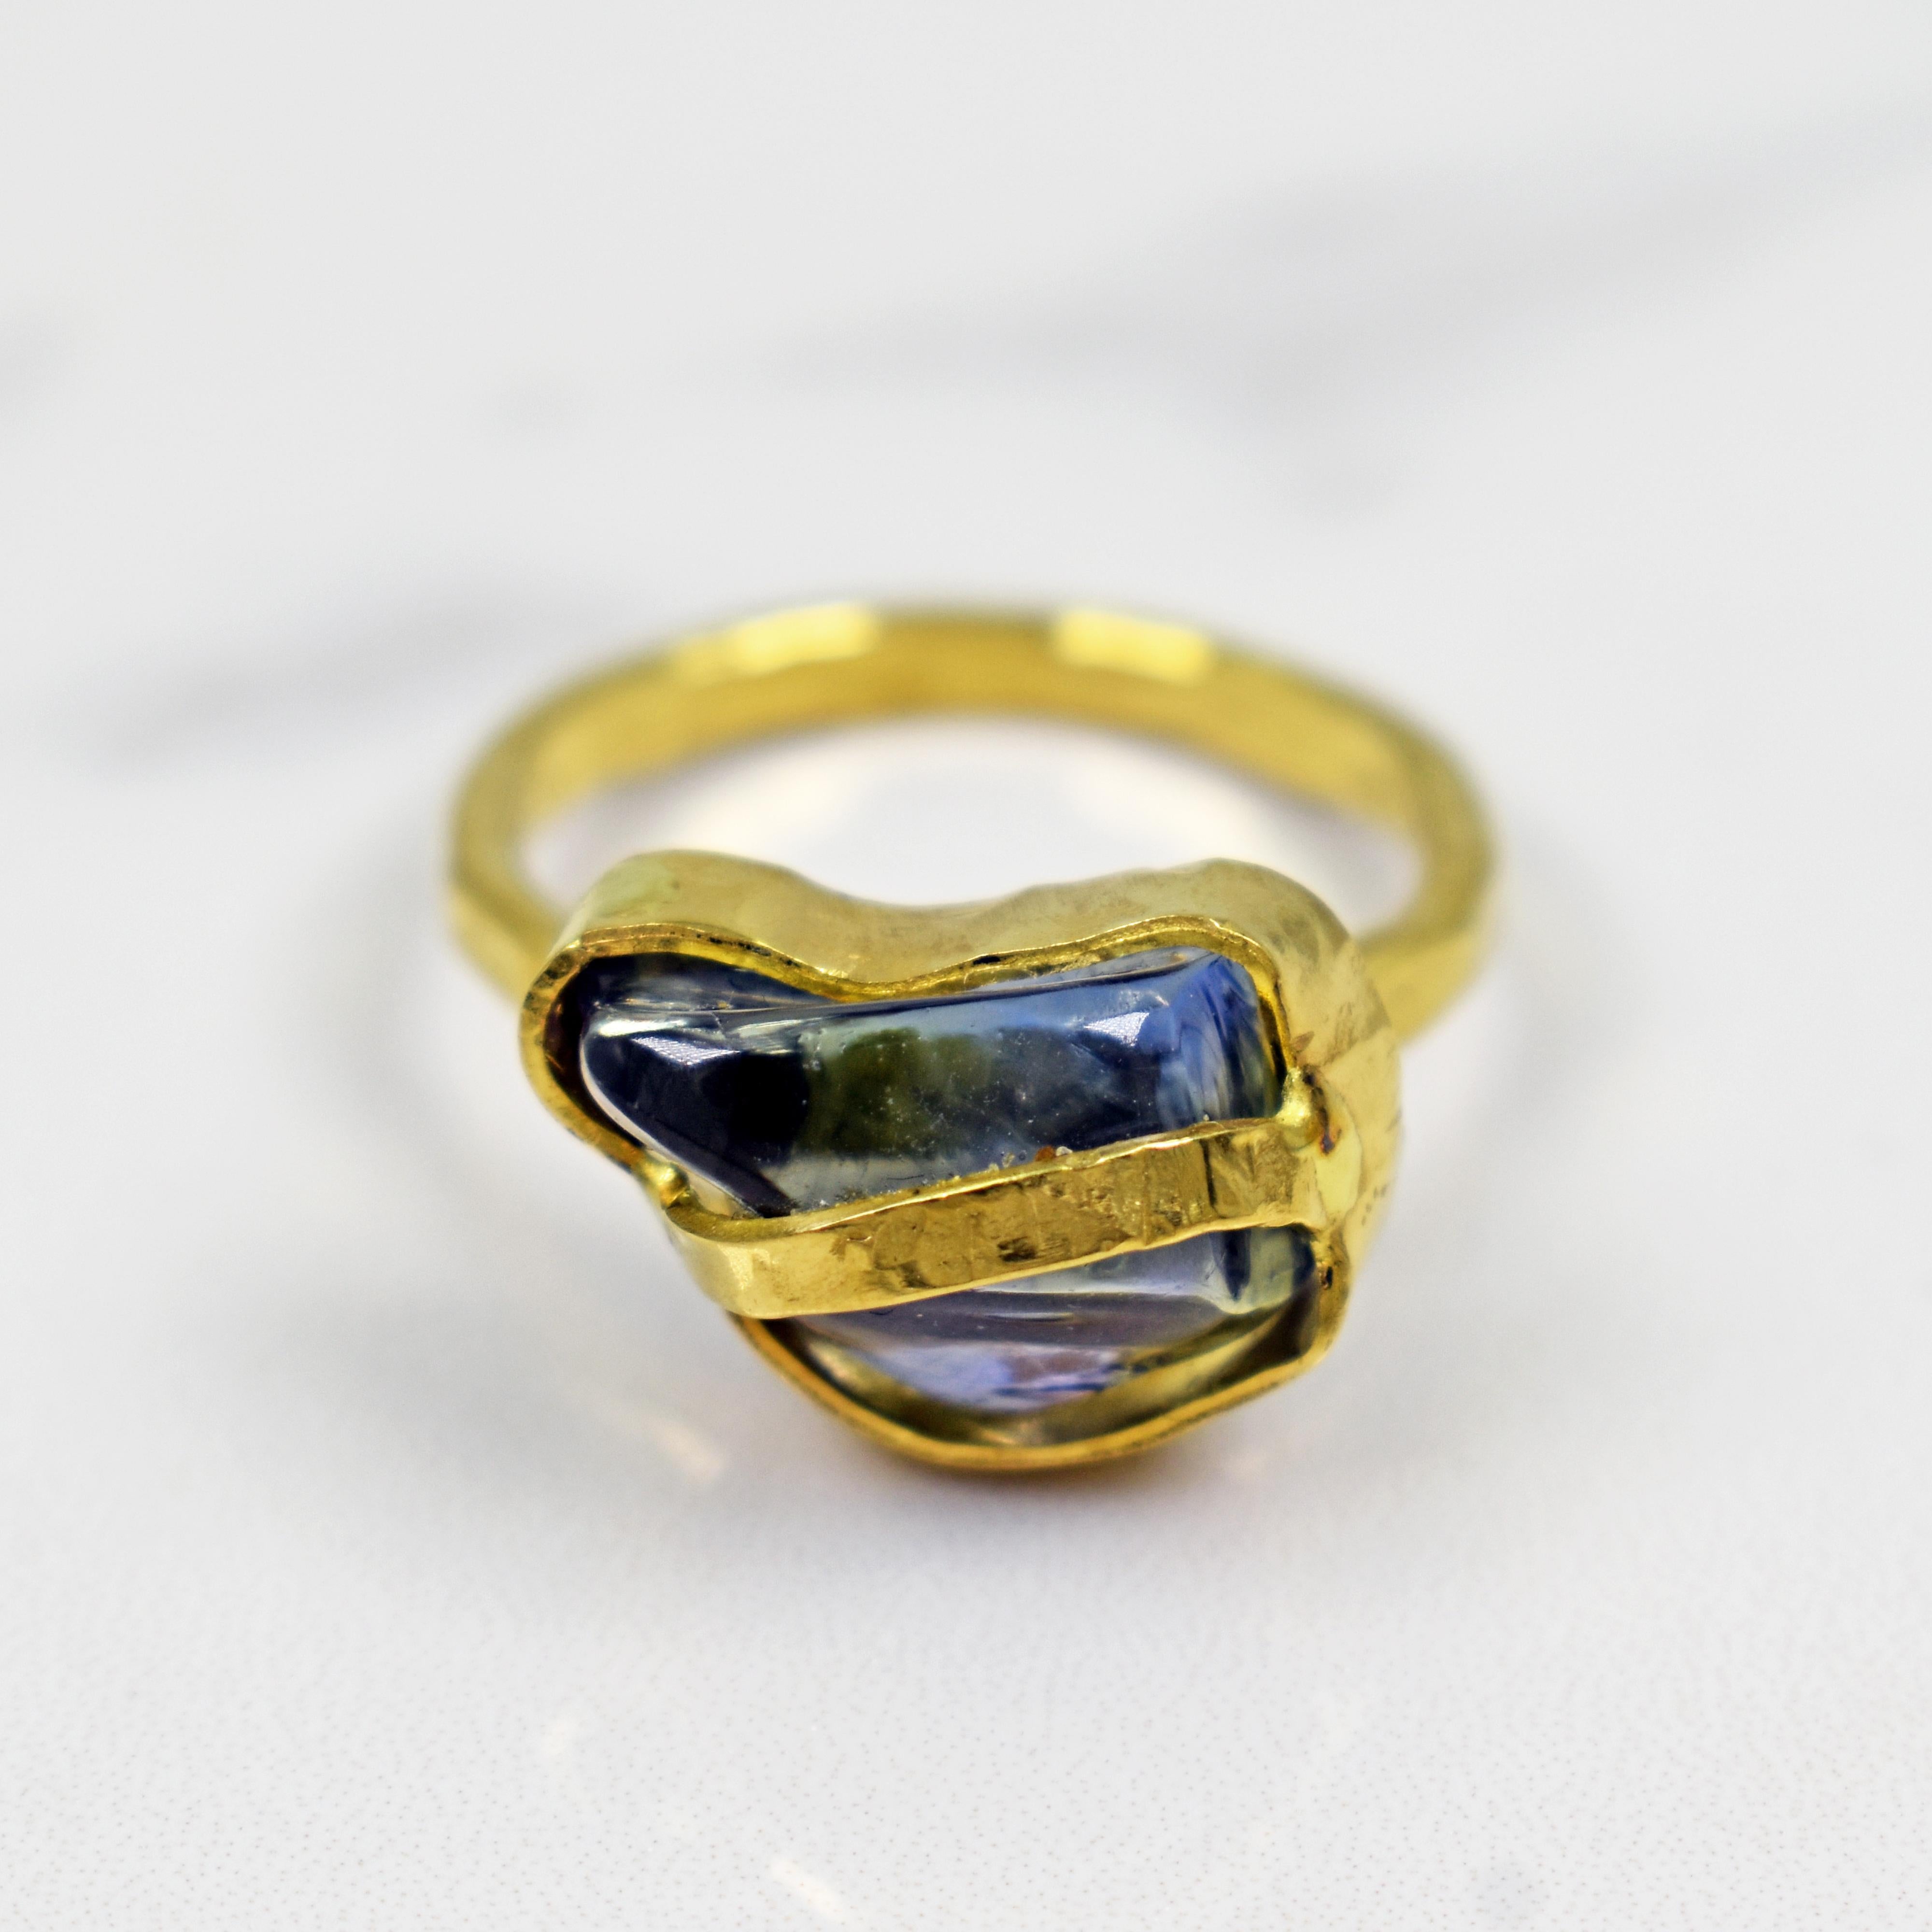 Unique, polished rough / freeform shaped blue Sapphire set in hammered, hand-forged 22k yellow gold fashion cocktail ring. Size 7. Gorgeous gemstone set in a one-of-a-kind, artisan ring with a rustic finish.